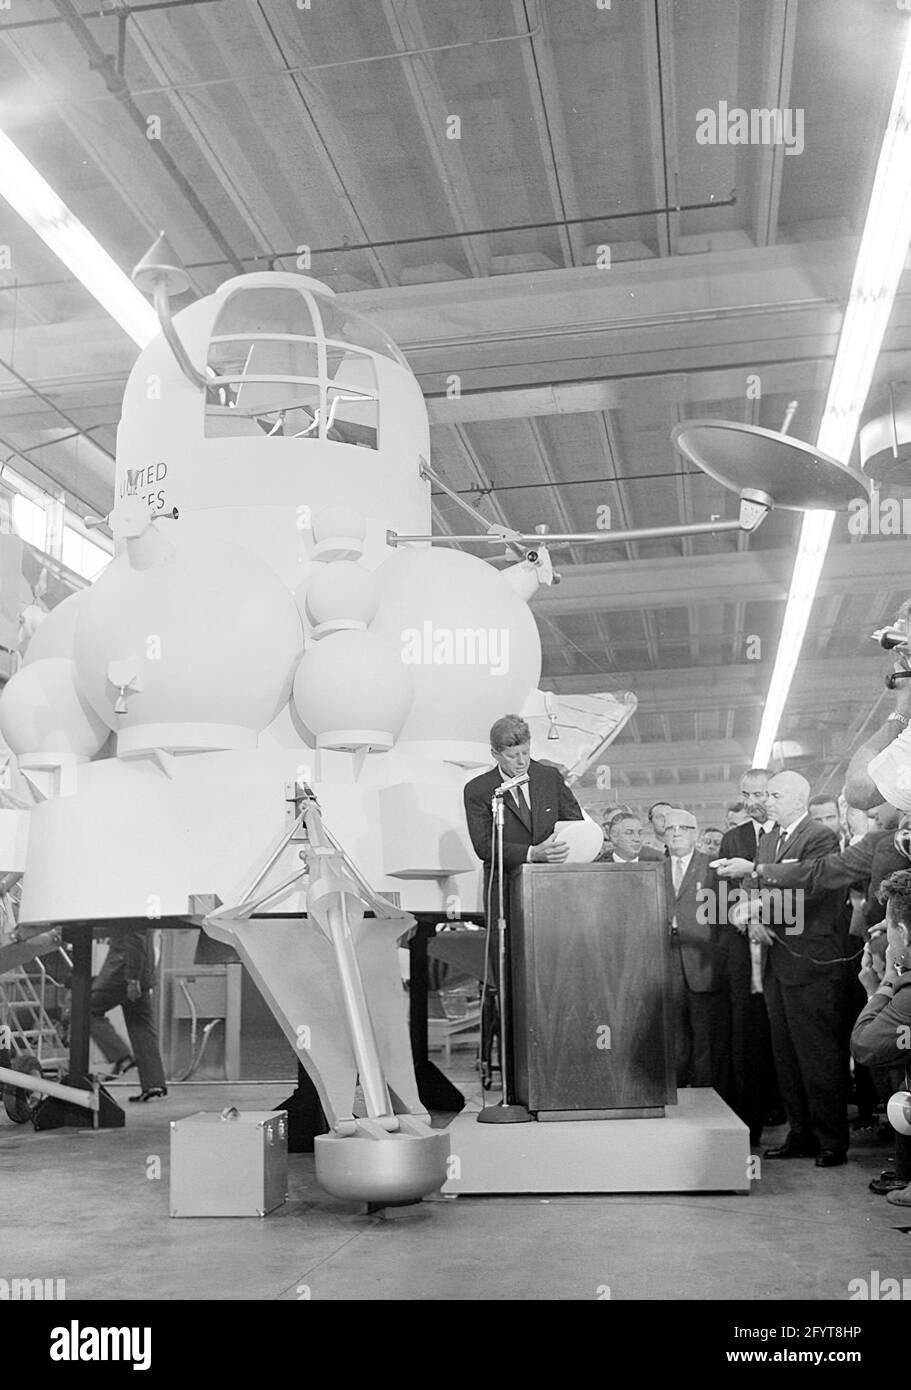 12 September 1962President John F. Kennedy (at lectern) delivers remarks, following a tour of spacecraft displays inside a hangar at the Rich Building of the Manned Spacecraft Center, Houston, Texas. President Kennedy holds a scale model of the Apollo command module, presented to him by Director of the Manned Spacecraft Center, Dr. Robert Gilruth; a mock-up of the lunar lander (also known as 'the Bug') sits at left in background. Standing in back: Director of Operations for Project Mercury, Dr. Walter C. Williams; Associate Administrator of the National Aeronautics and Space Administration Stock Photo